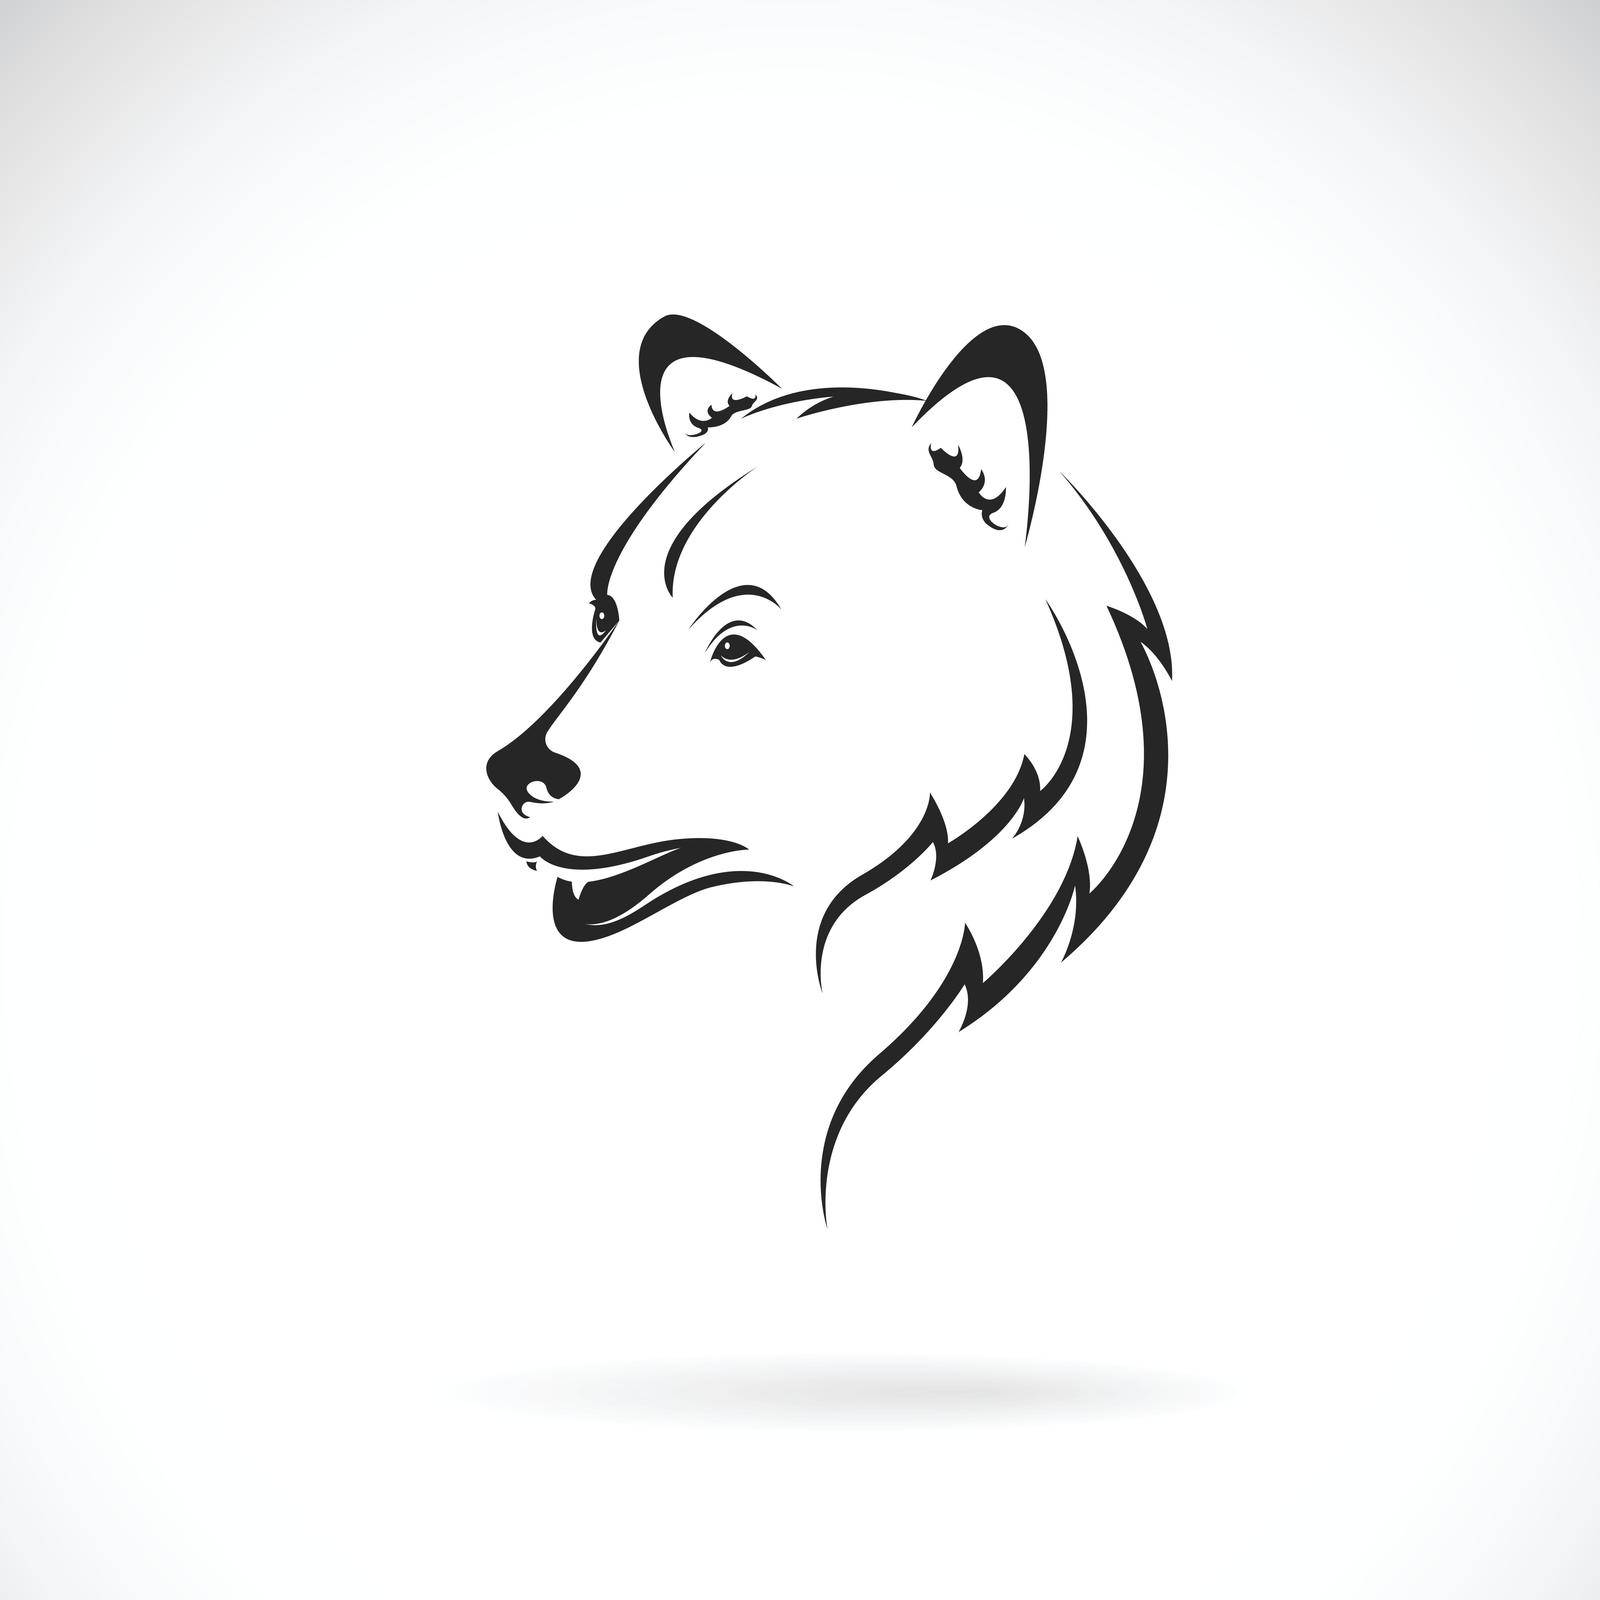 Vector of bear head design on white background., Wild Animals. Easy editable layered vector illustration. by yod67